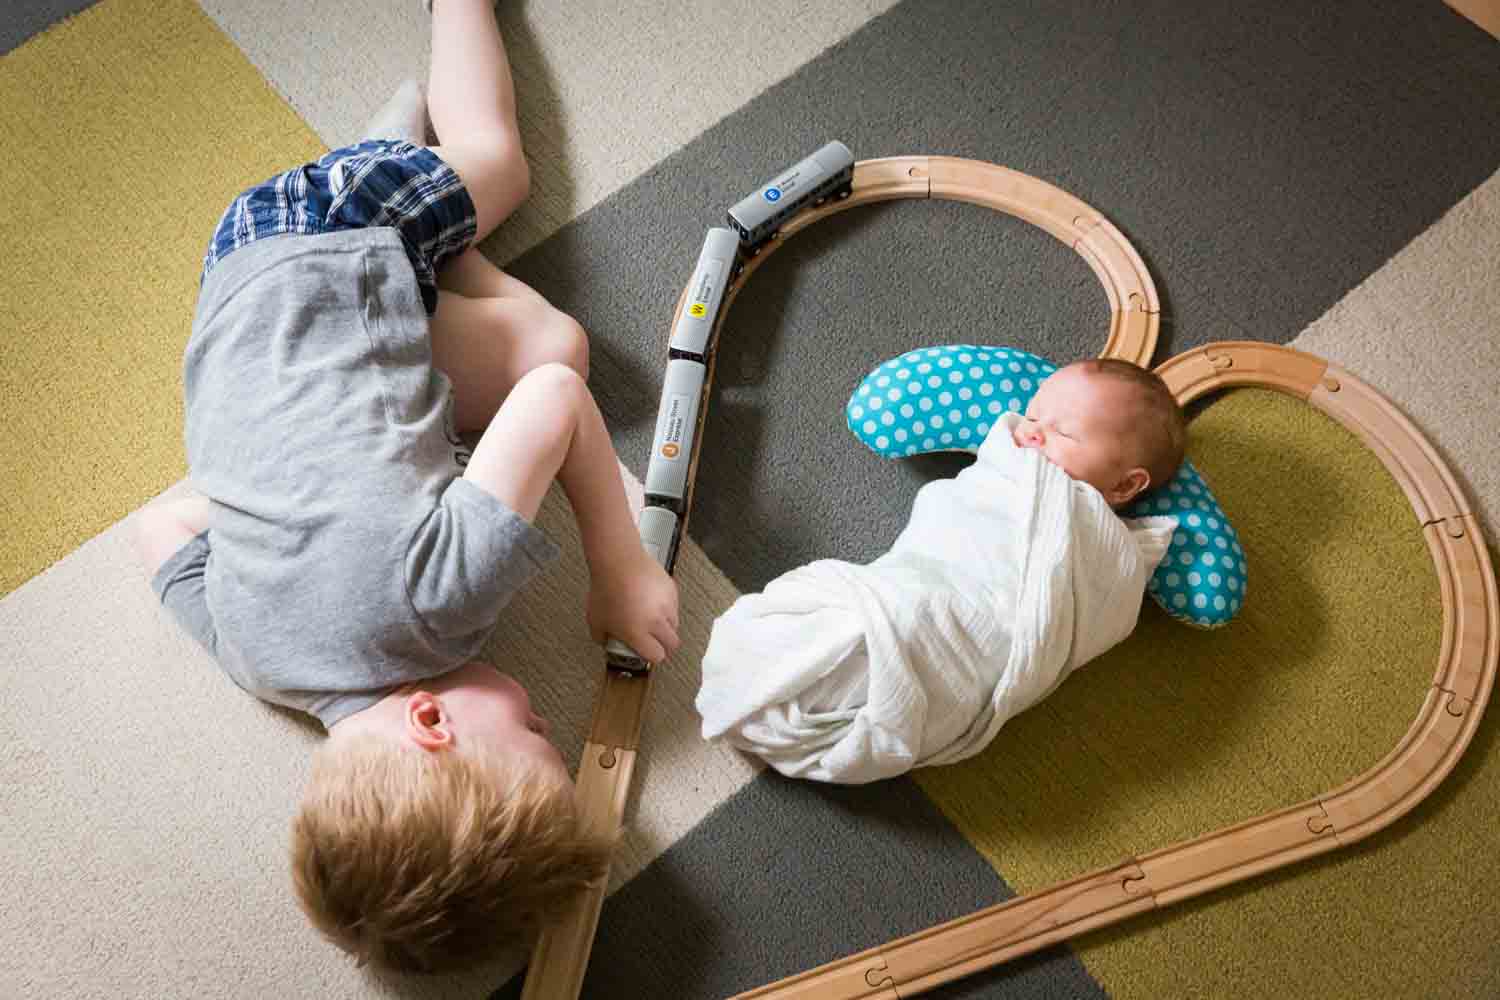 Little boy looking at newborn baby in middle of railroad toy set